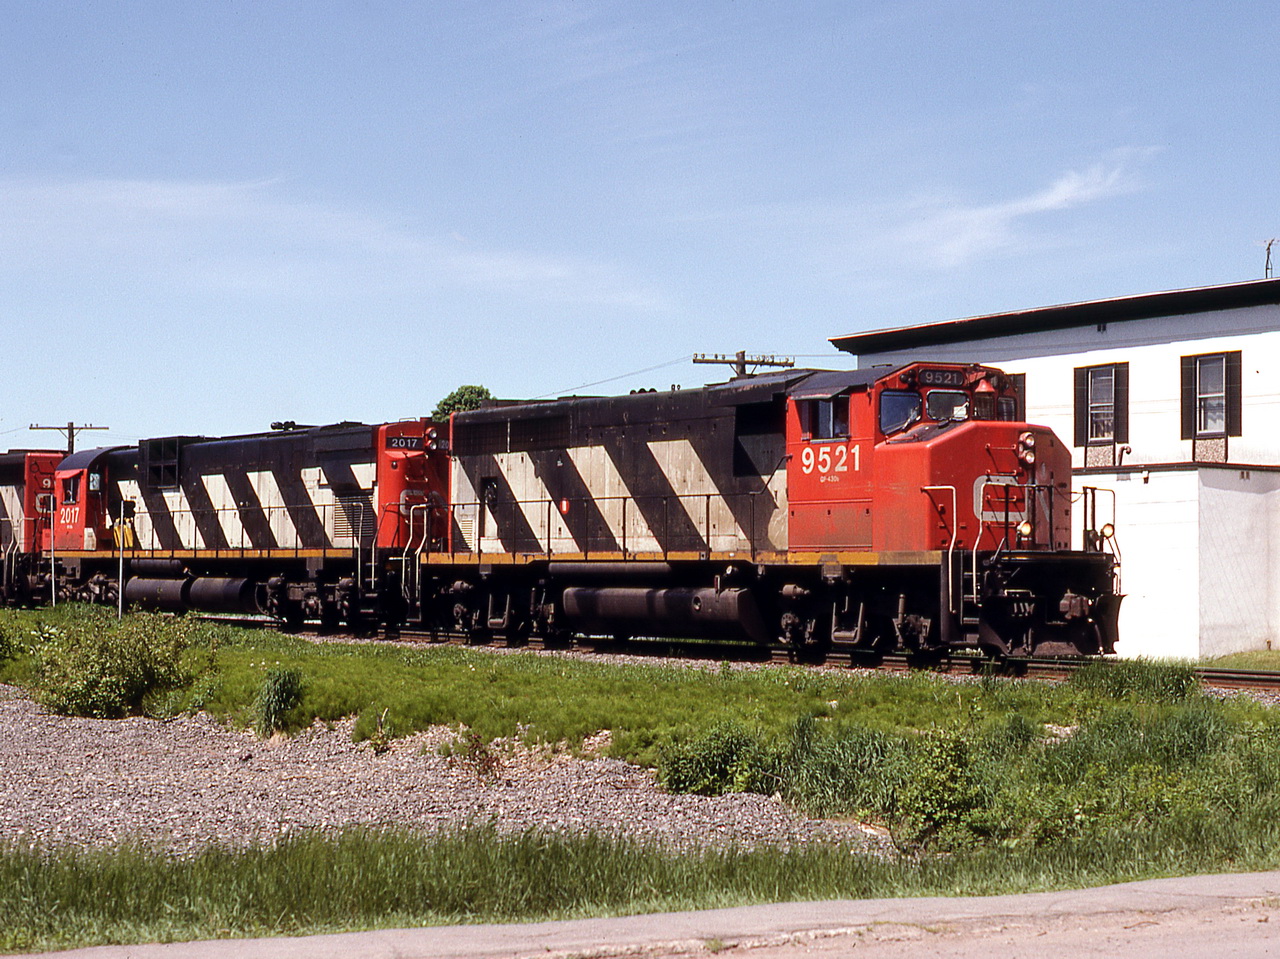 CN 306 with 9621 as 3rd unit passes through Dave at 30 mph.